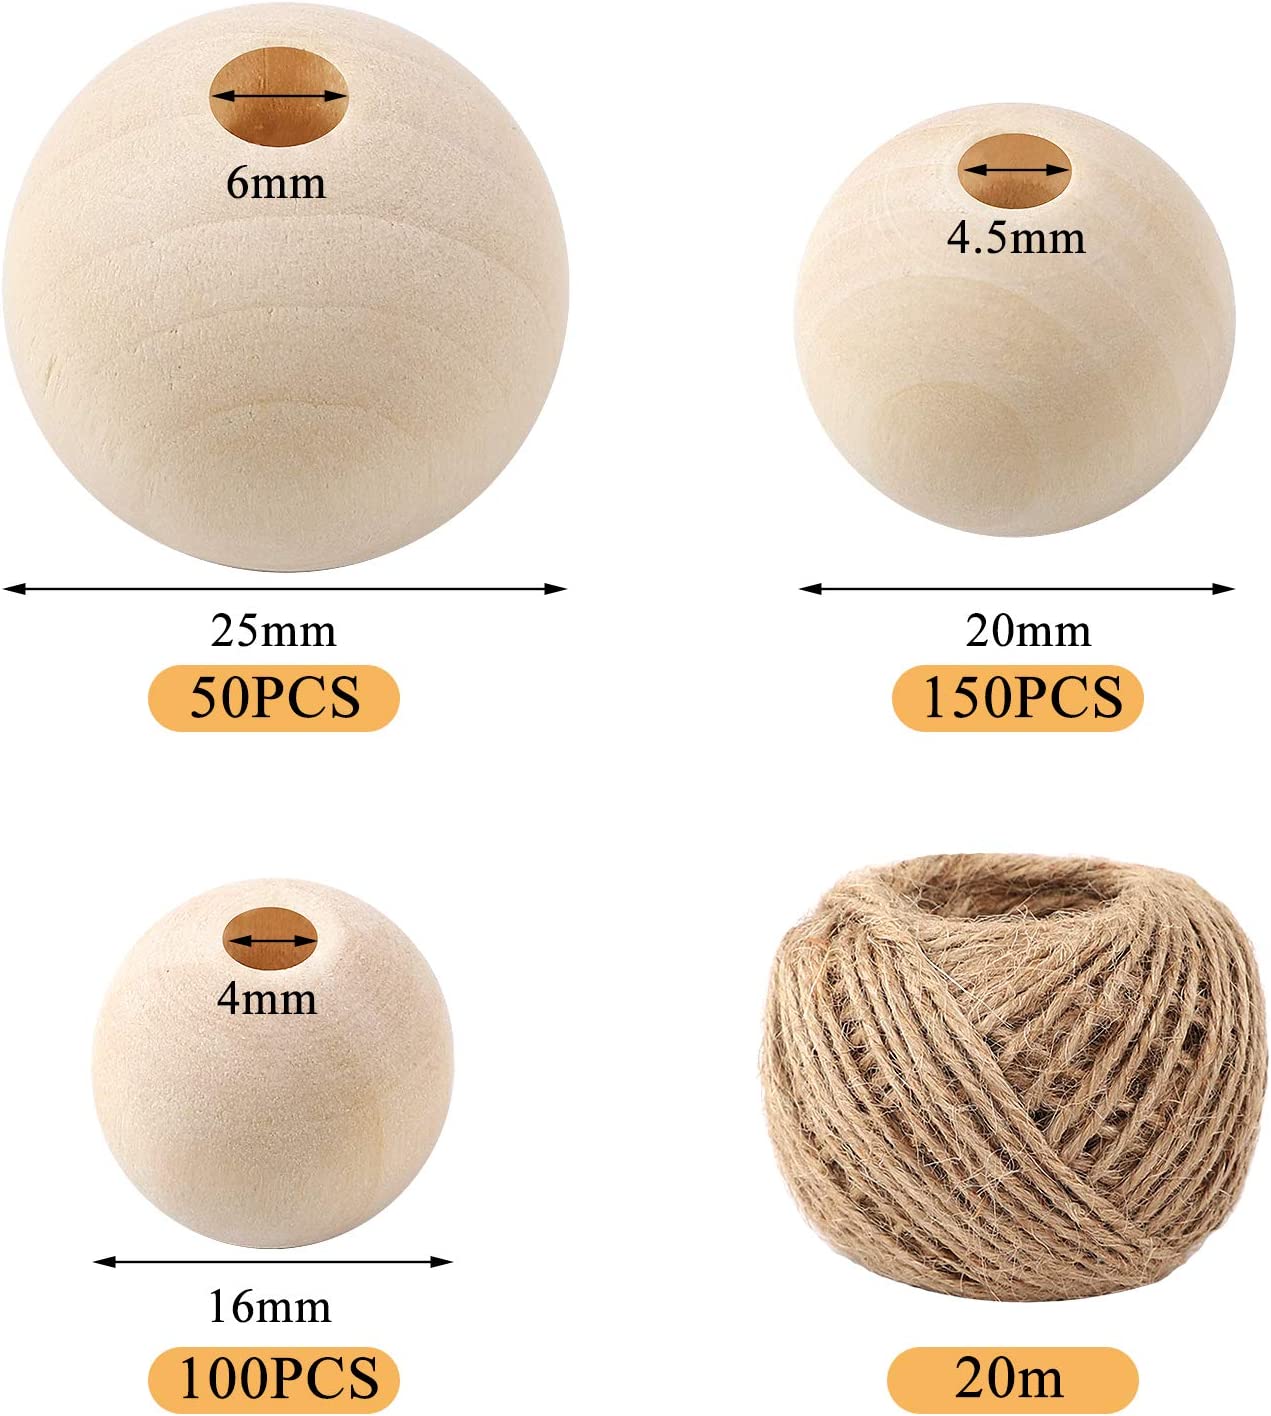 Wooden Beads, 100pcs Natural Wood Beads, Unfinished Wood Beads Bulk, Round Wooden Beads for Crafts, 3 Sizes Smooth Wooden Balls with Holes for Farmhou